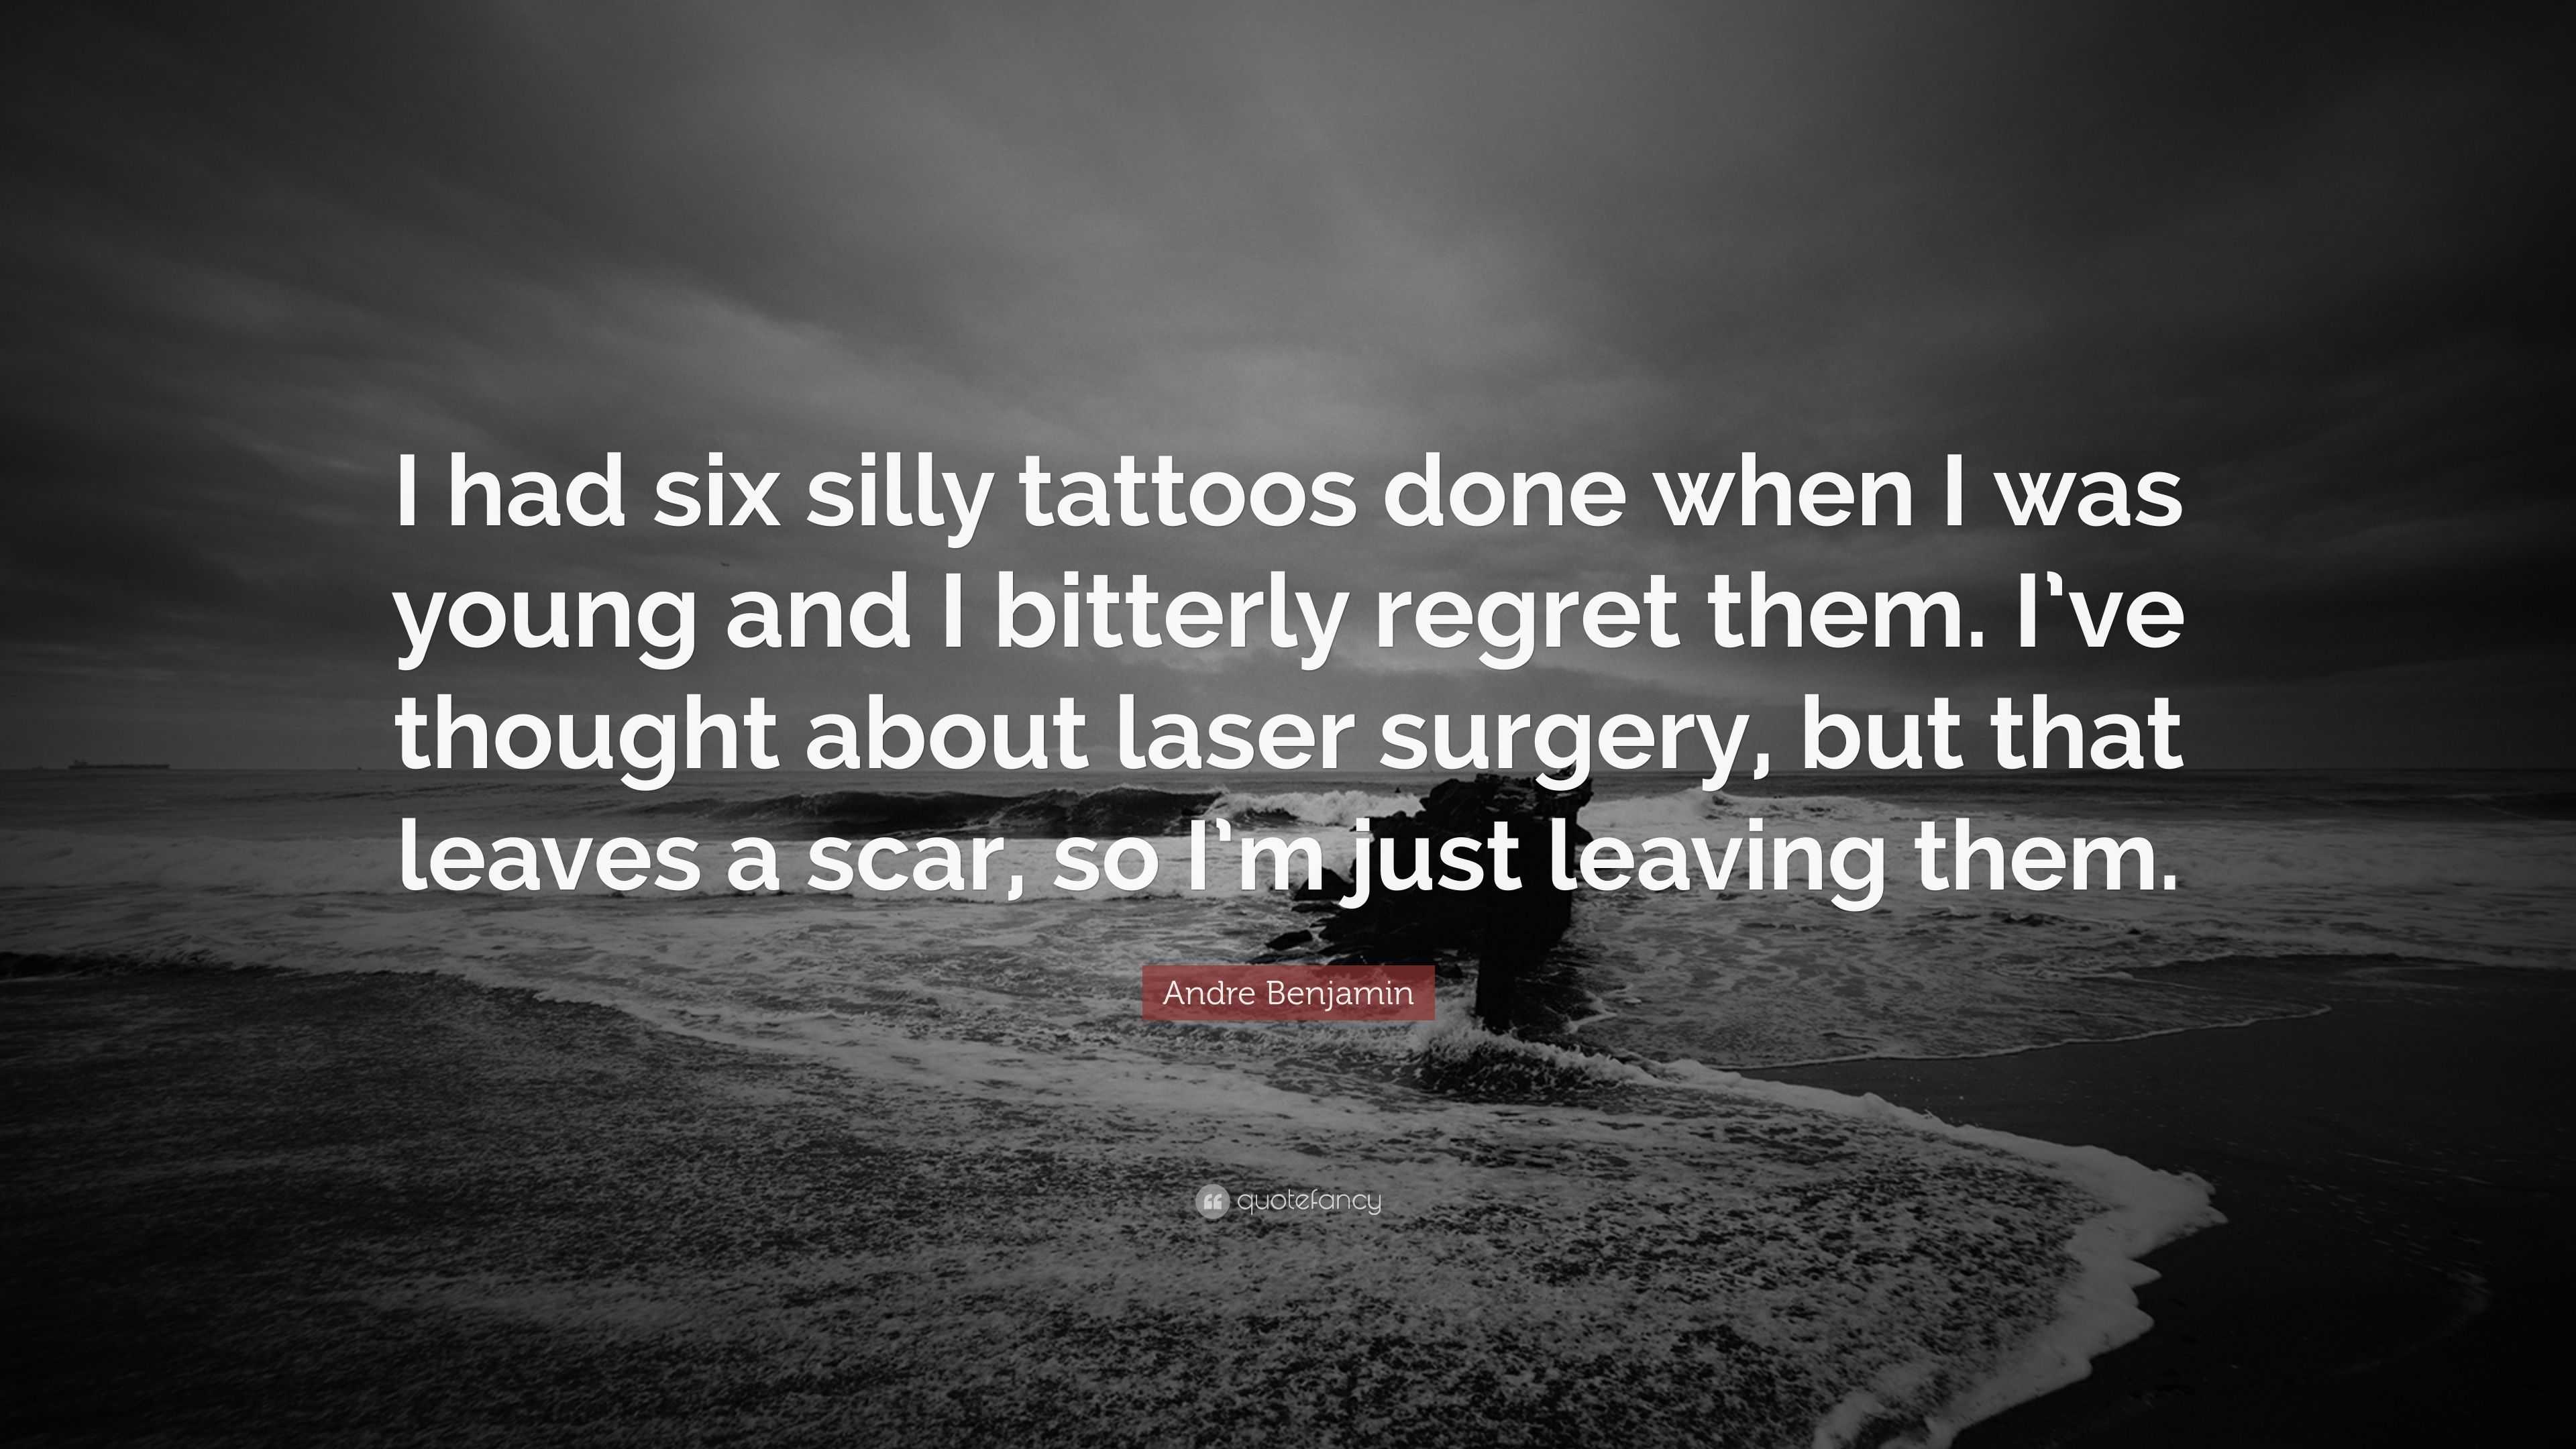 Andre Benjamin Quote I had six silly tattoos done when I was young and I  bitterly regret them Ive thought about laser surgery but that lea